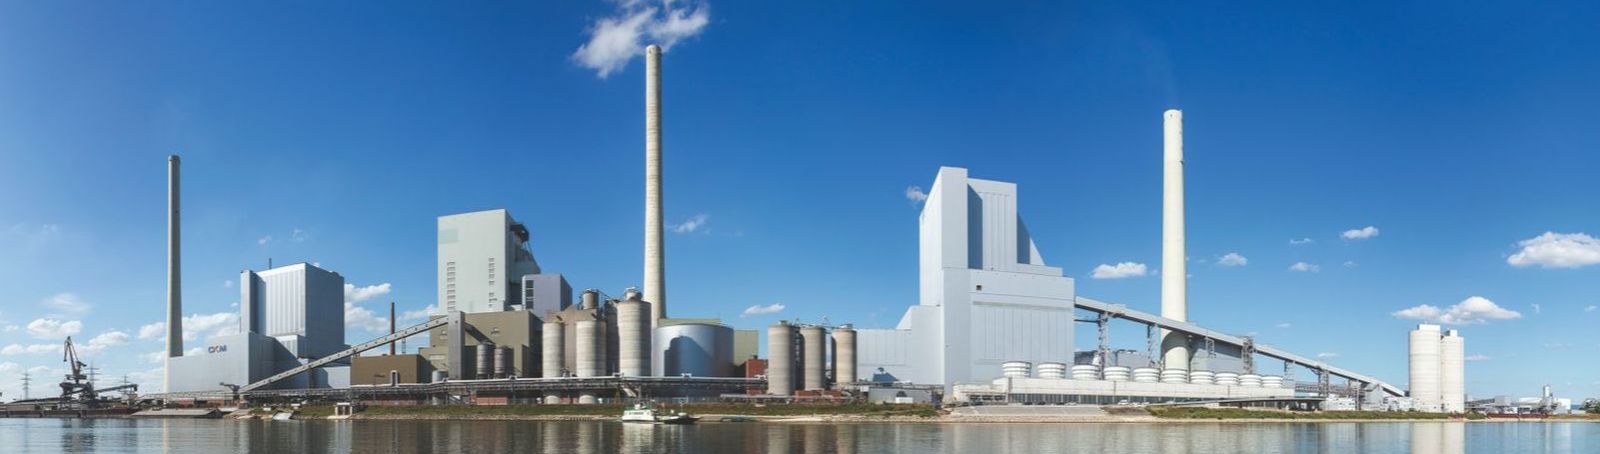 The GKM Mannheim power station situated by the Rhine features highly efficient water abstraction and return flow systems. These are ideally suited for the integration of a large-scale heat pump as a heat source